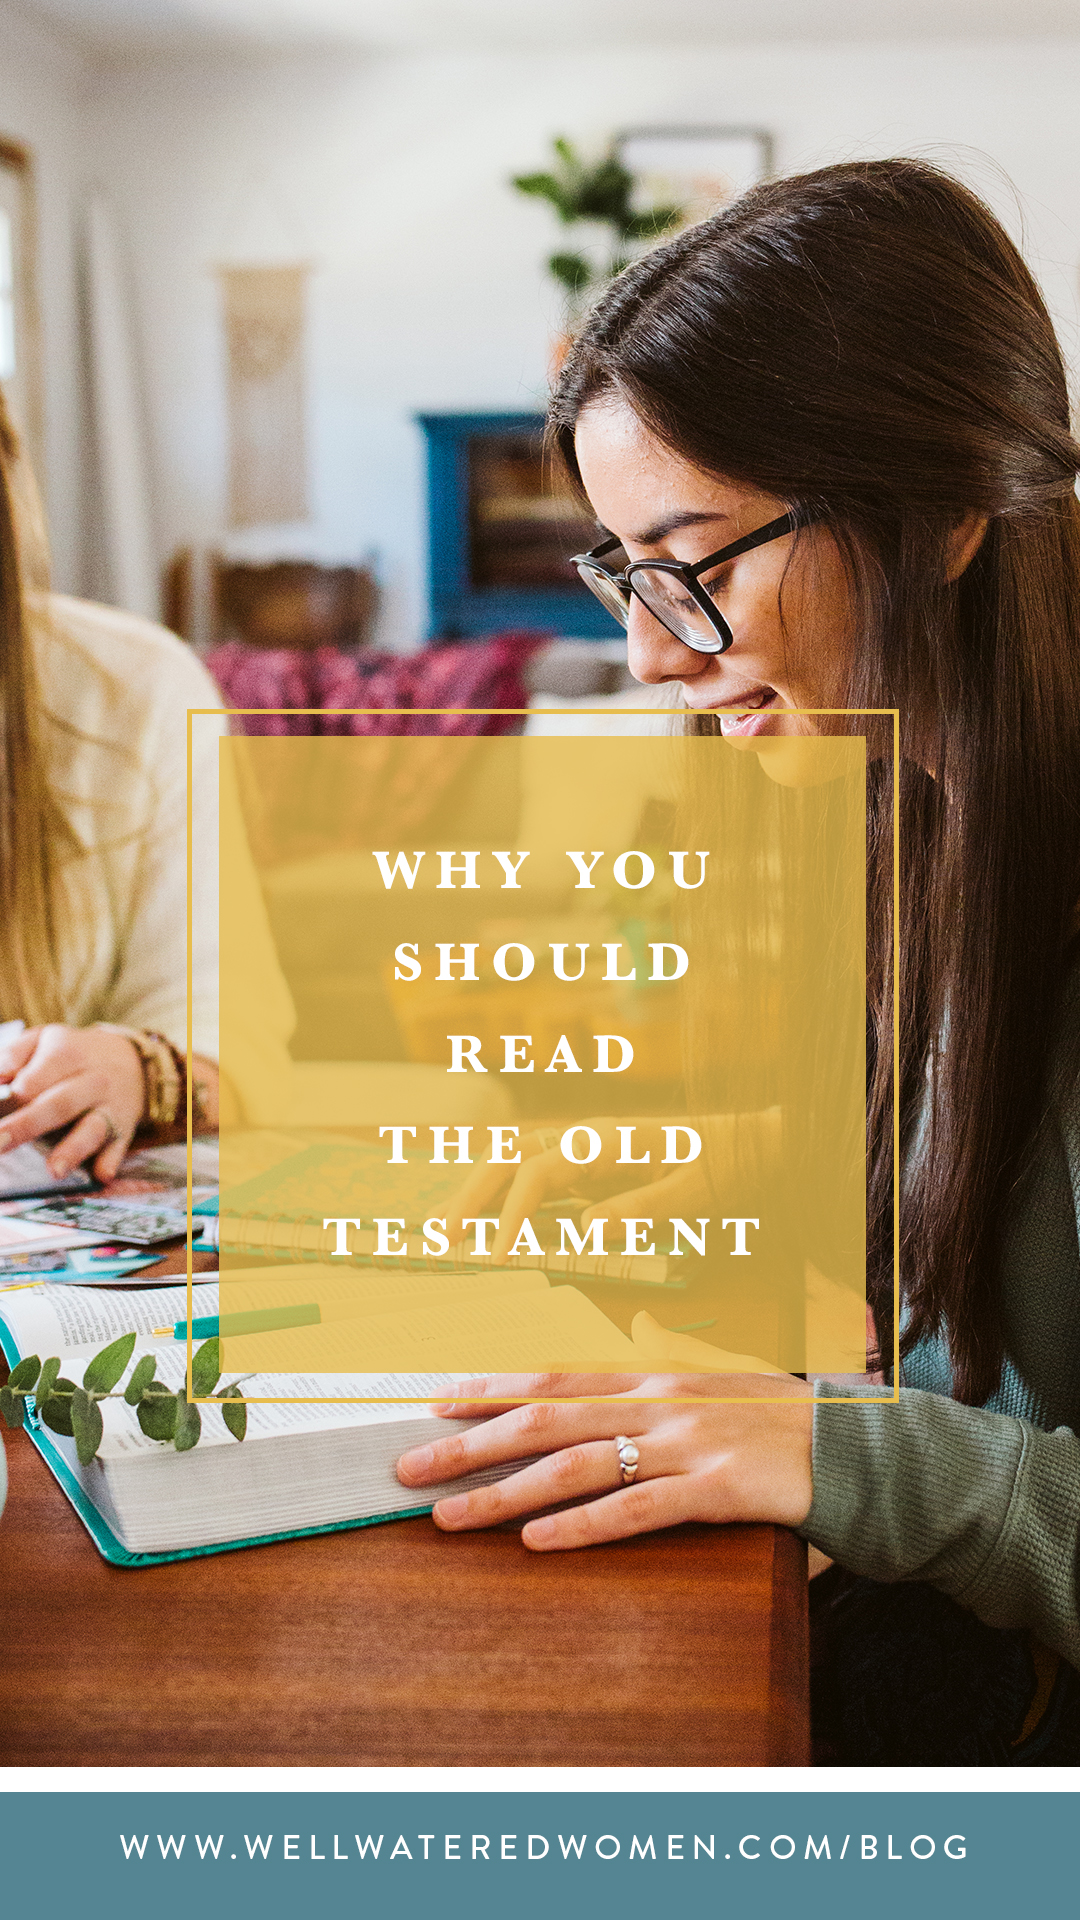 Why You Should Read the Old Testament: Well-Watered Women